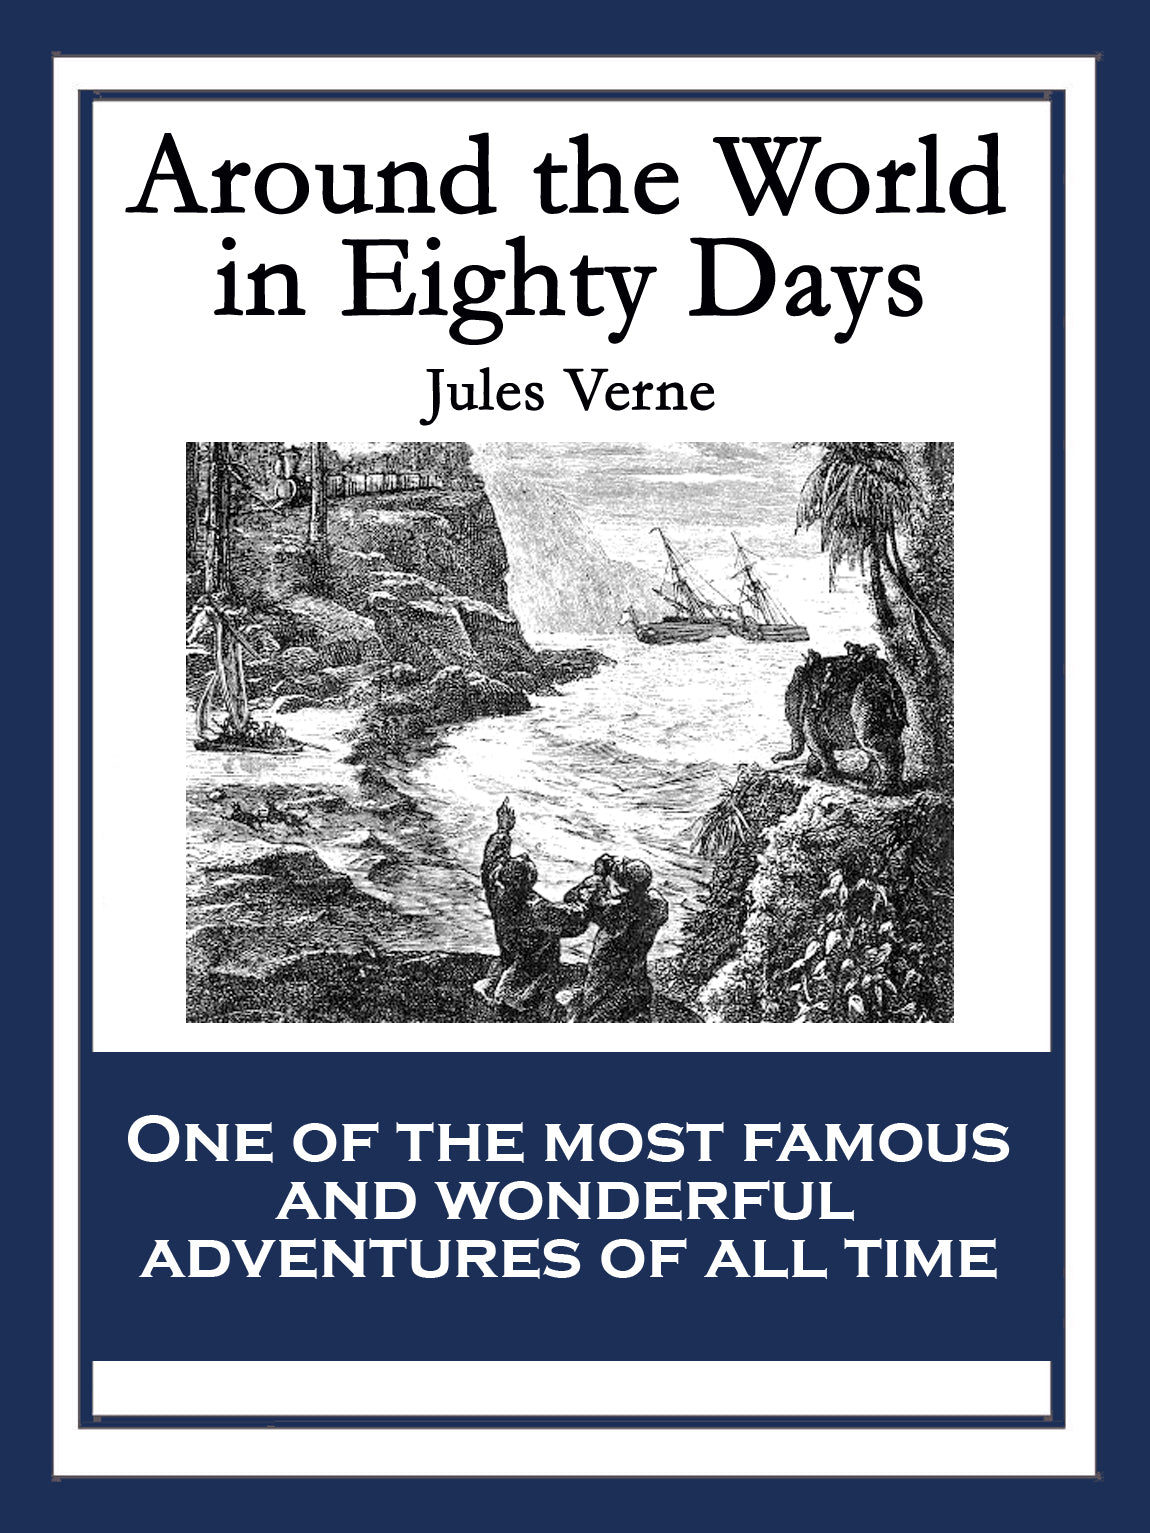 Cover art for Around the World in Eighty Days.